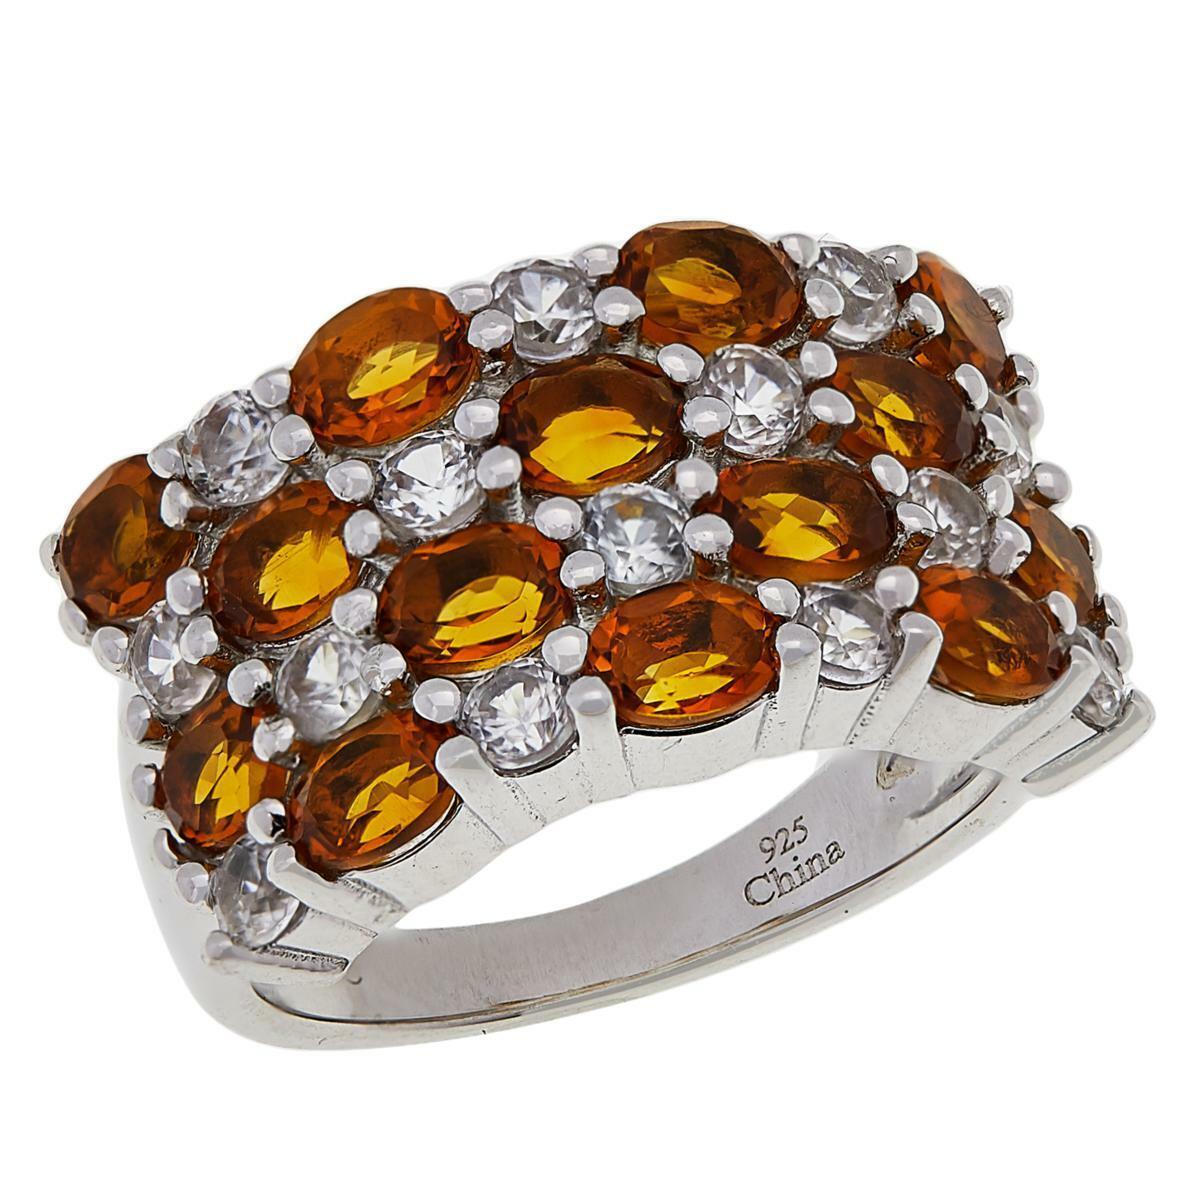 Colleen Lopez Citrine and White Zircon 4 Row Band Ring, Size 6